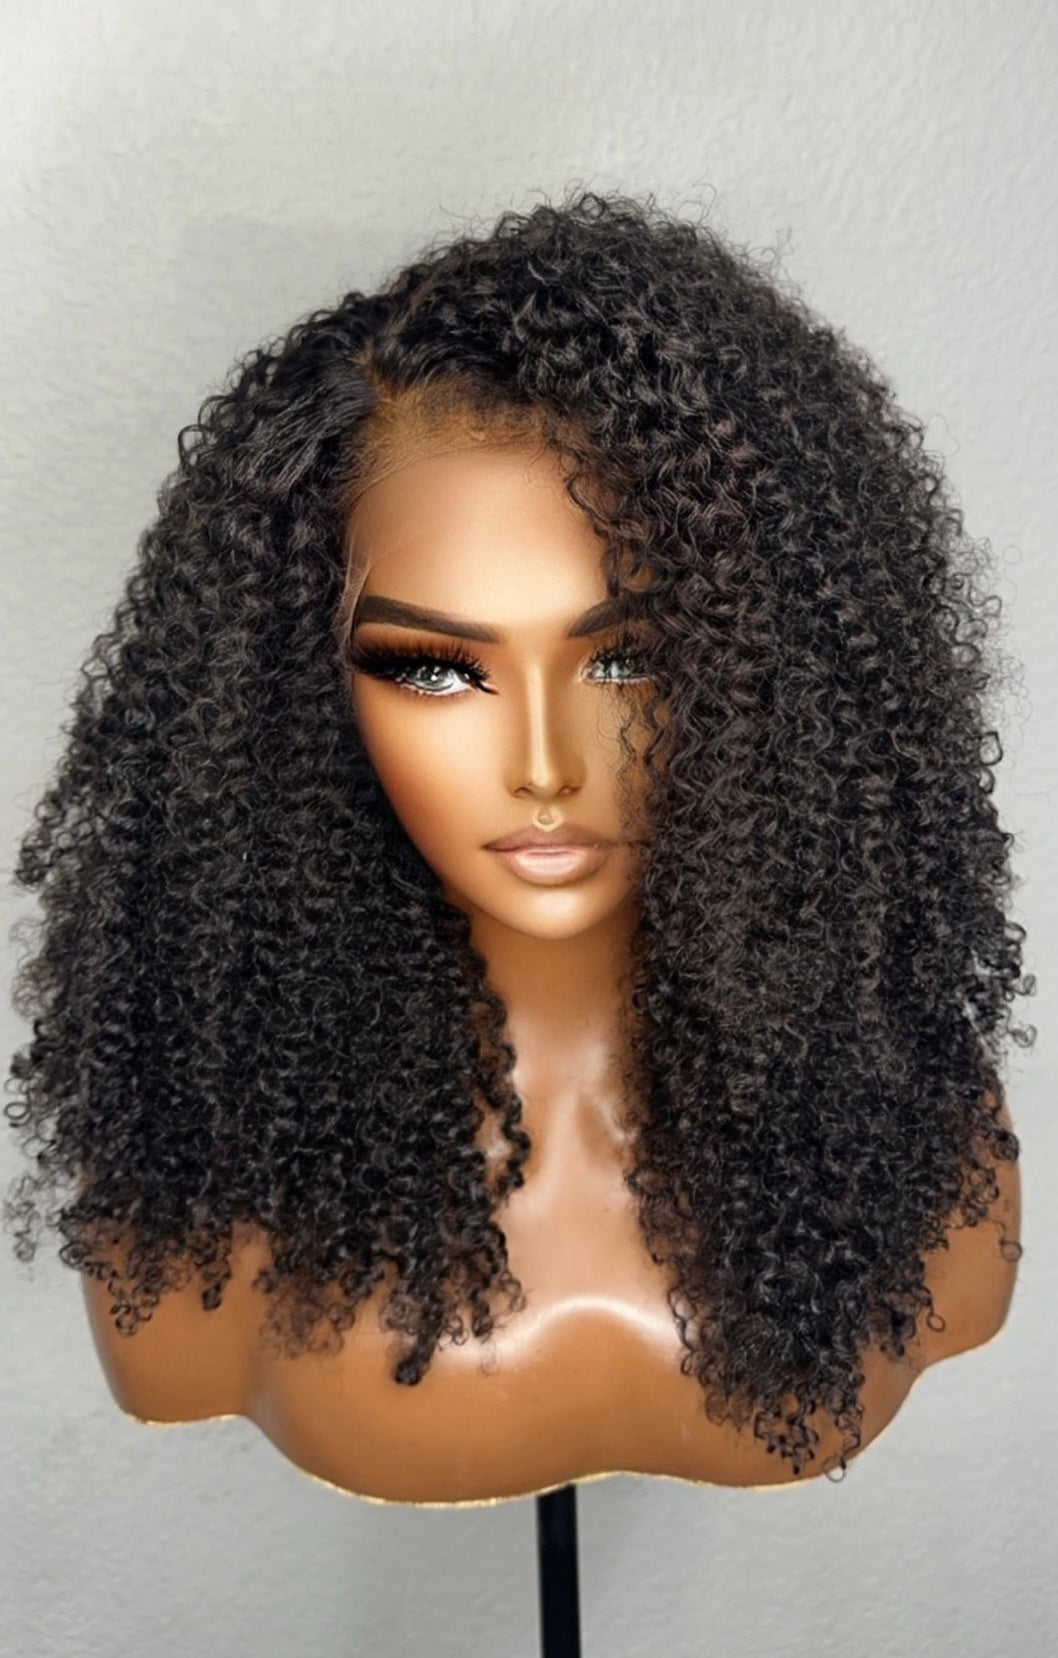 "Ebony" Afro Kinky Curly with Natural Edges